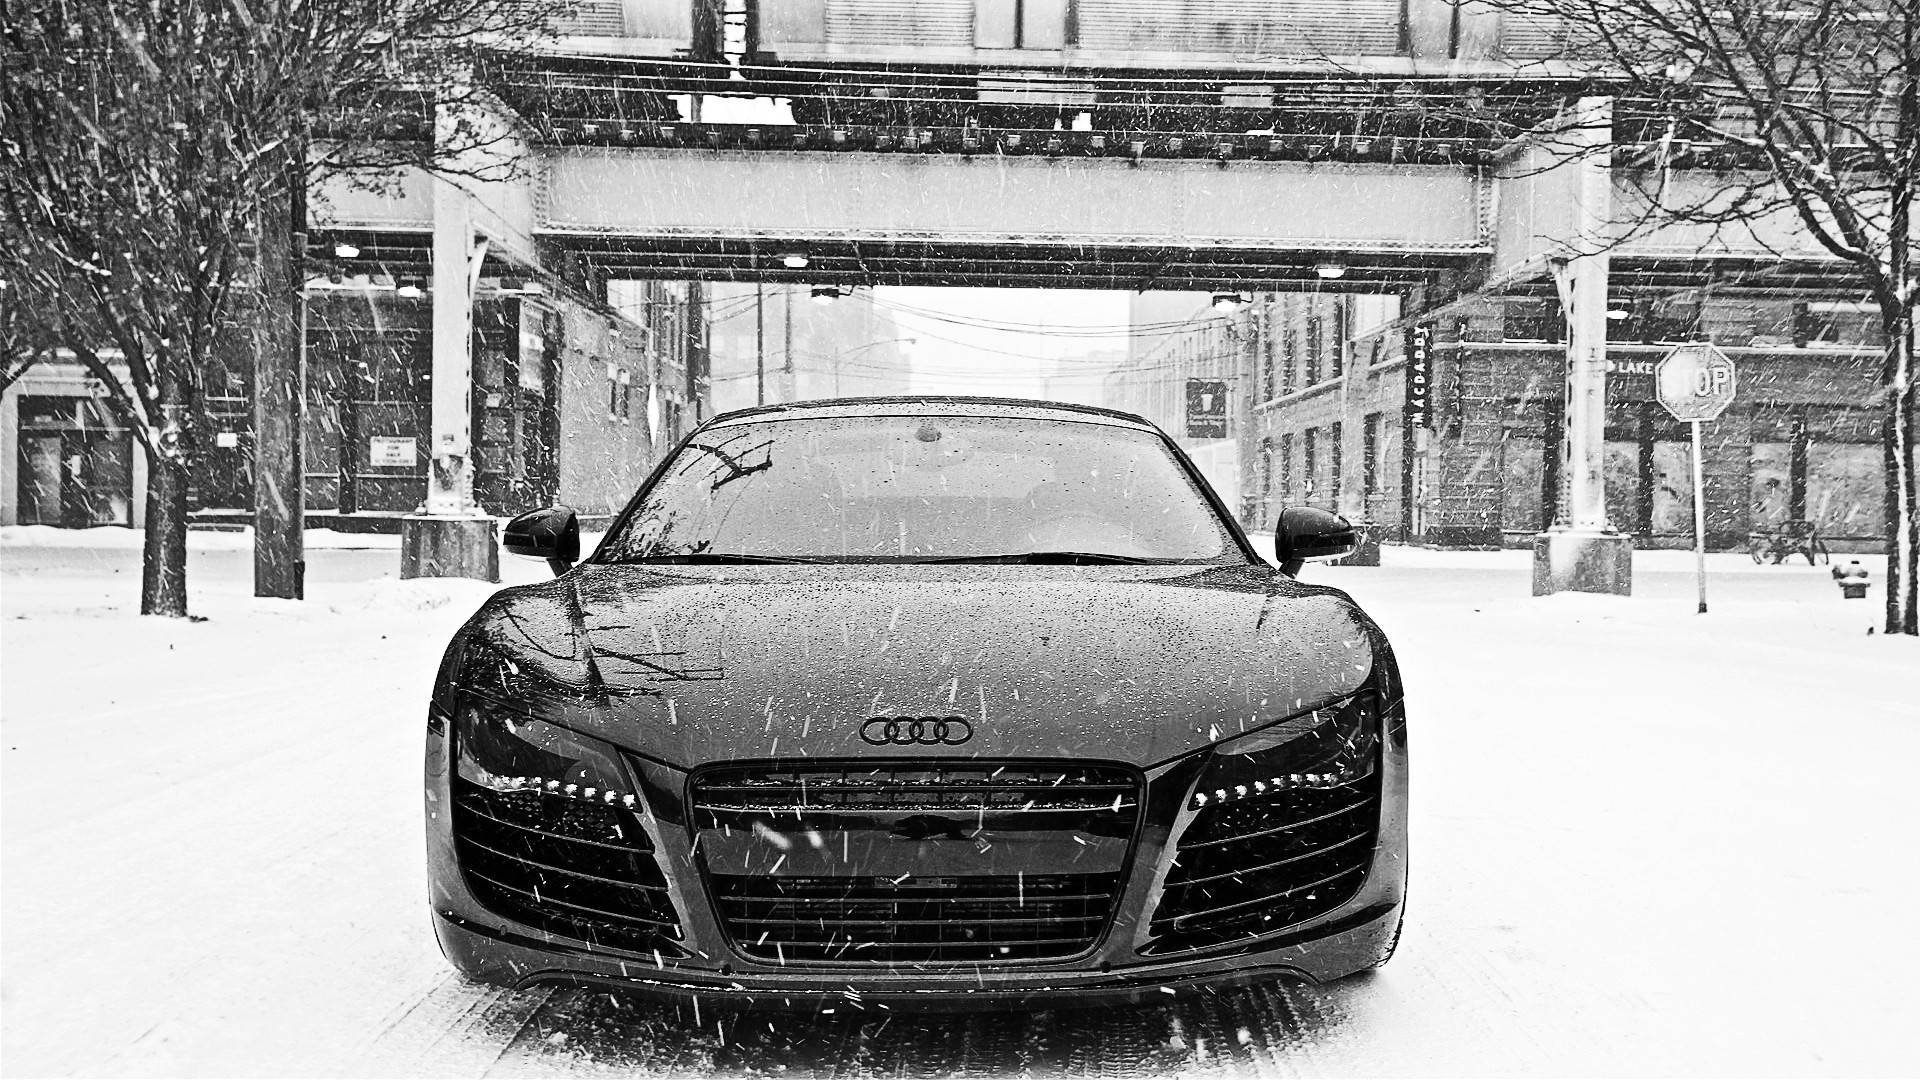 1920x1080 Black and White Audi in Snow HD Wallpaper in Full HD from the Cars  category. Tags: Audi Black and White, front view, snow, Winter